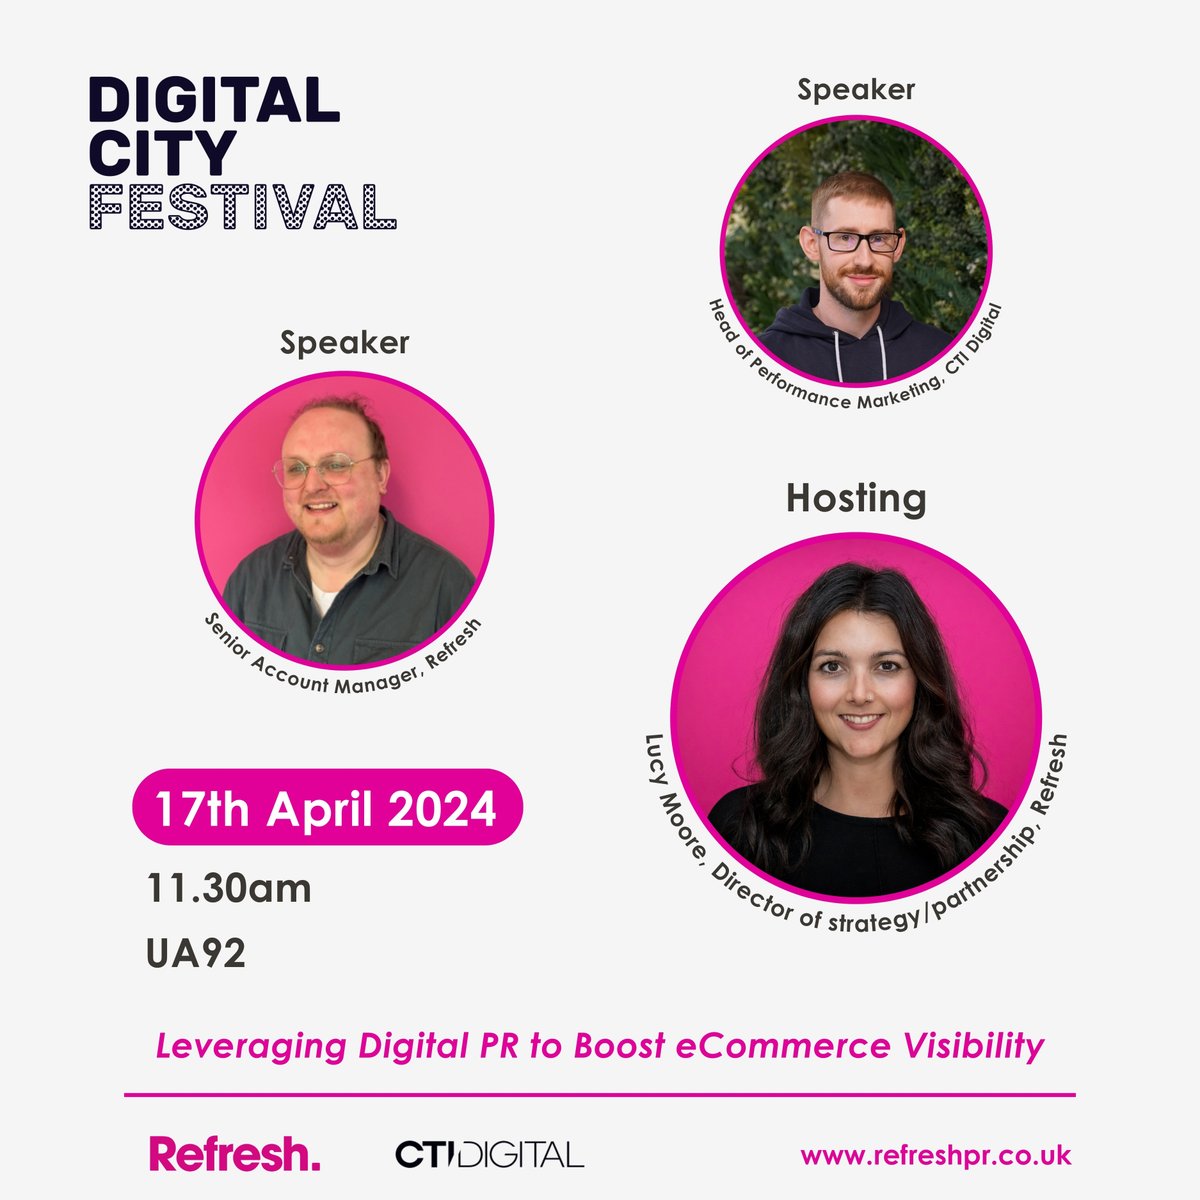 It's almost here! Join us at the Digital City Festival on Thursday for an insightful session on boosting your e-commerce visibility with digital PR and content. Meet us at UA92, at 11:50 am! #DigitalCityFestival #eCommercemarketing #DigitalPR